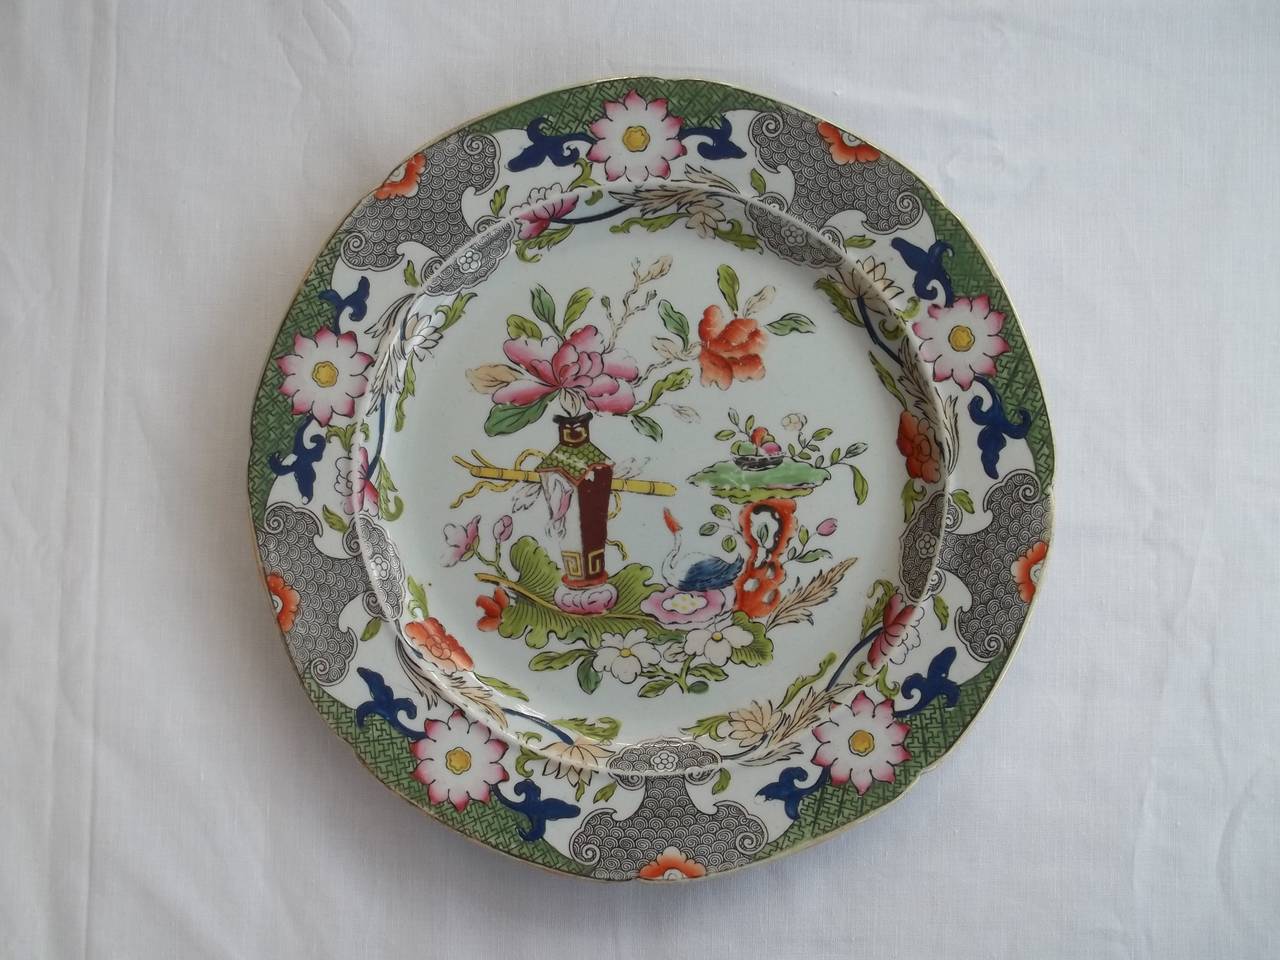 This is a harlequin set of SIX MASONs Ironstone Plates, all dating to the earliest period between 1813 and 1820. 

All the plates are the same size and shape, but have different patterns and base marks as follows; 

Top row left: Japan Basket